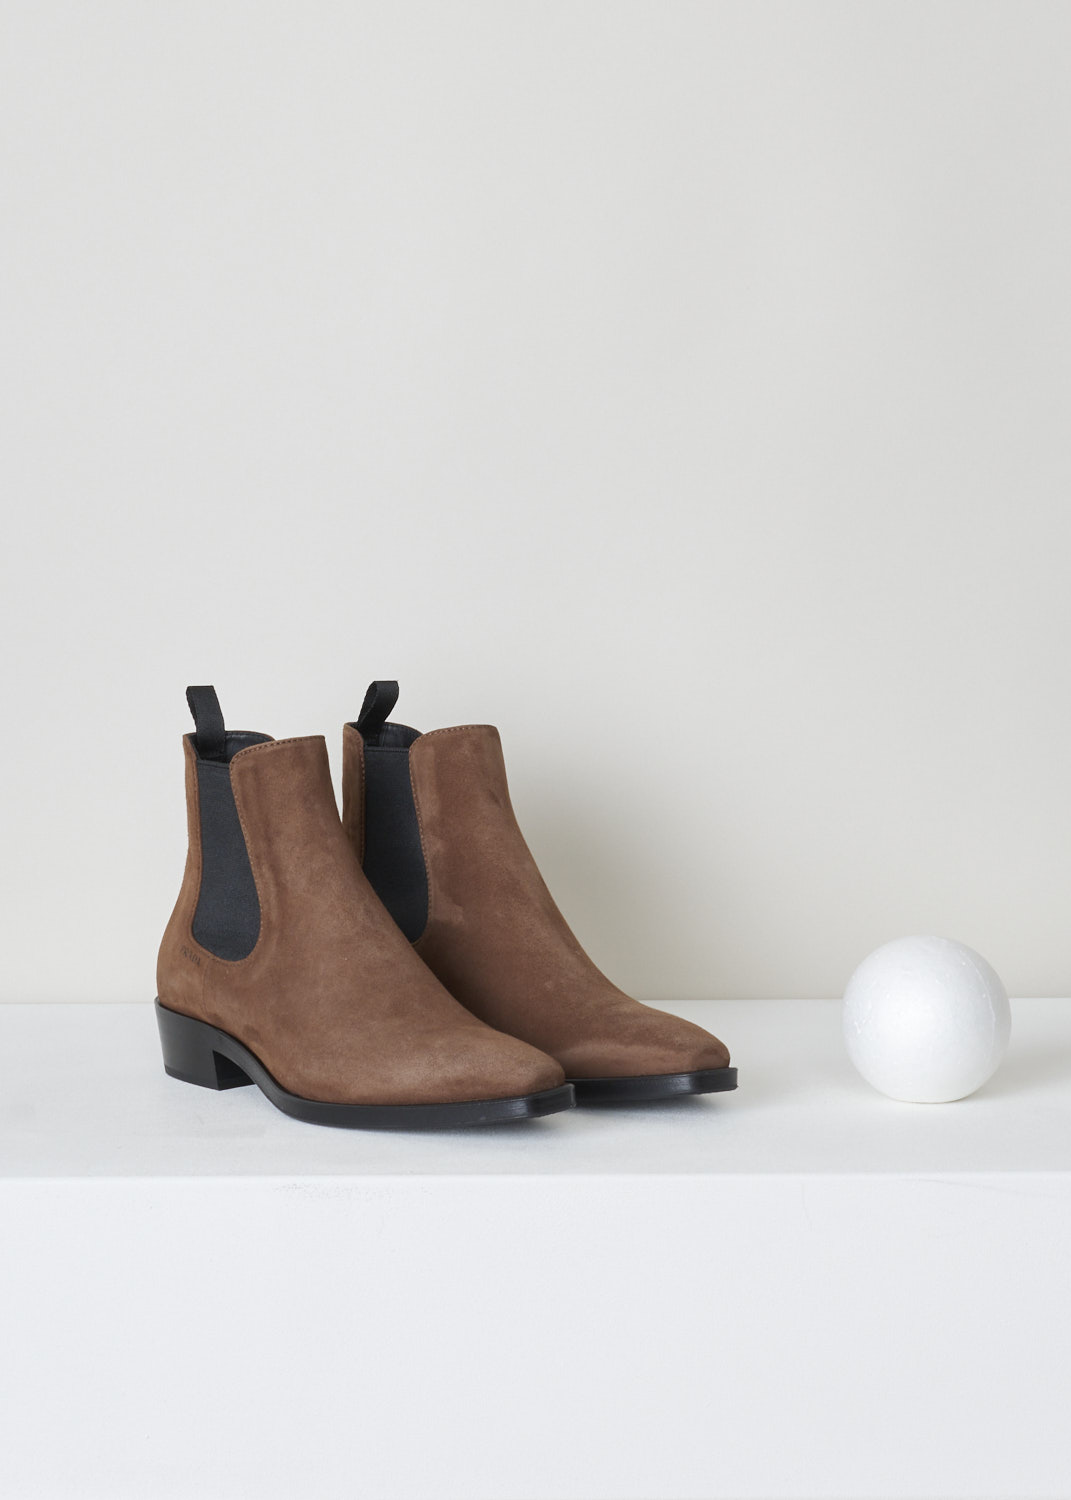 Prada, Brown suede chelsea boots, Camoscio_1T929I_F0038_bruciato, brown black, front, Brown suede chelsea boots featuring a contrasting black elastic side panel, and a pull tab on the back of the boot. Furthermore the sole is similarly contrasted which gives the boots more depth.